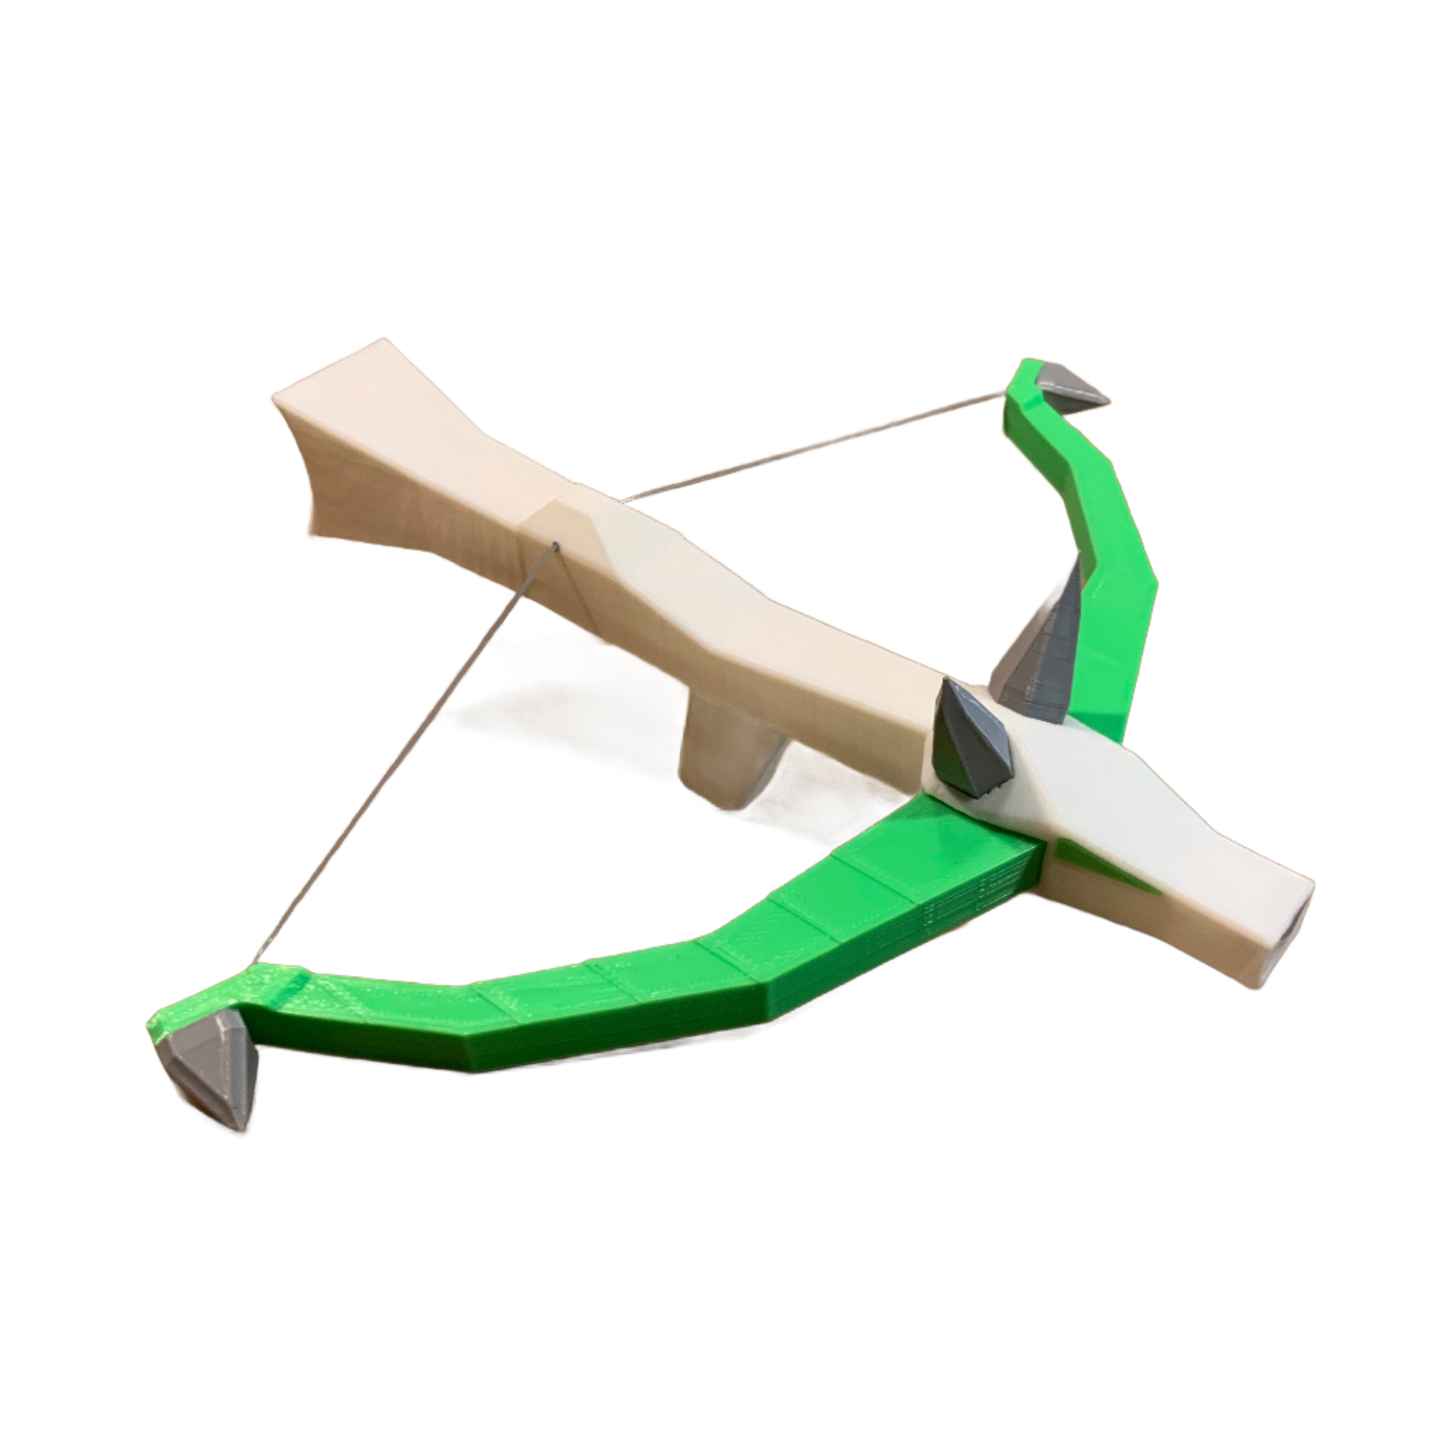 DRAGON HUNTER Crossbow / OSRS Style Weapon / Life Size Scale Runescape Weapon / Ranger Xbow / Prop / rpg Costume